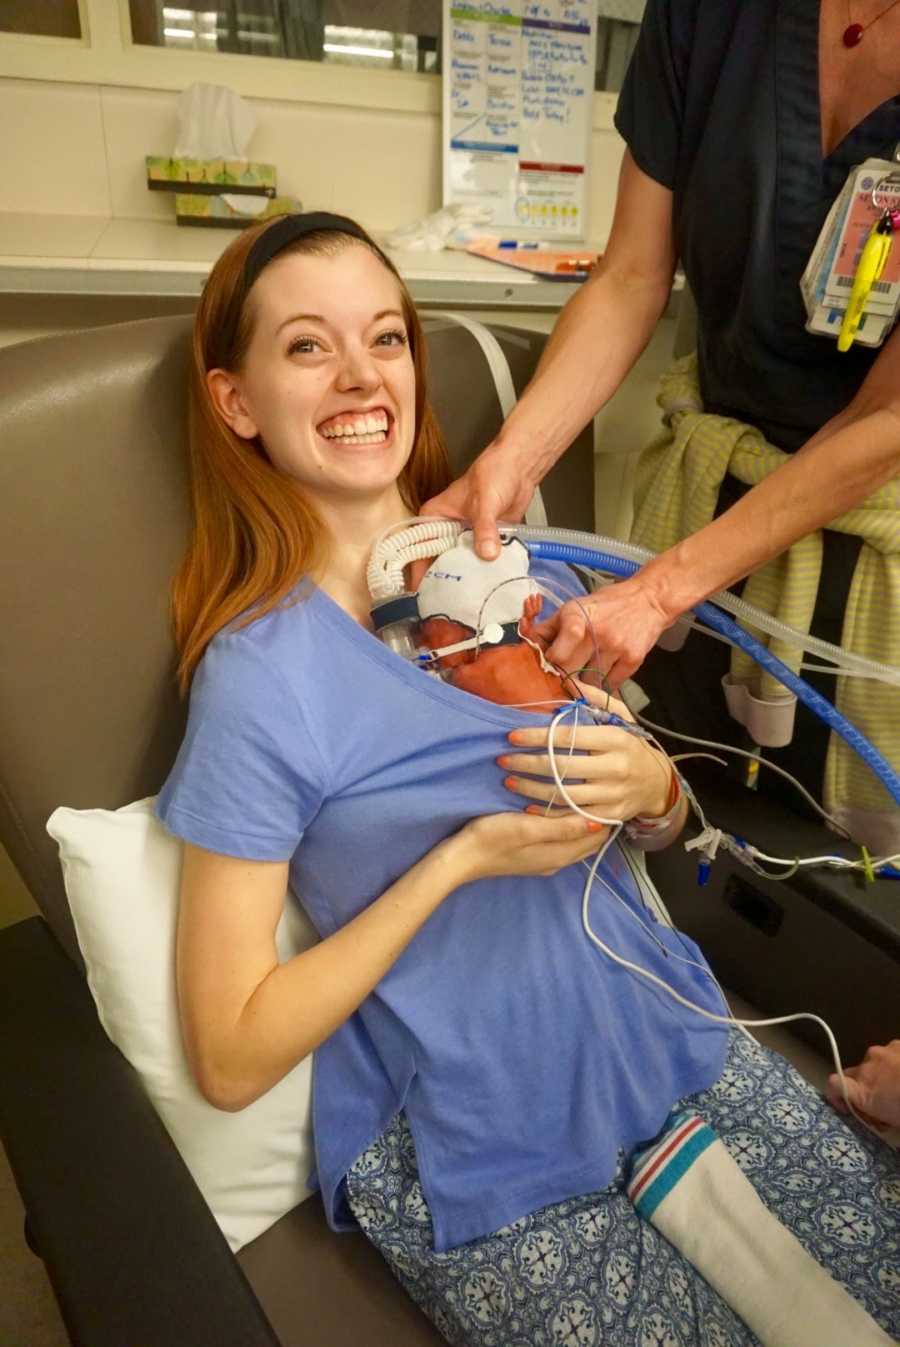 A mom holding her newborn baby who has a number of tubes connected.